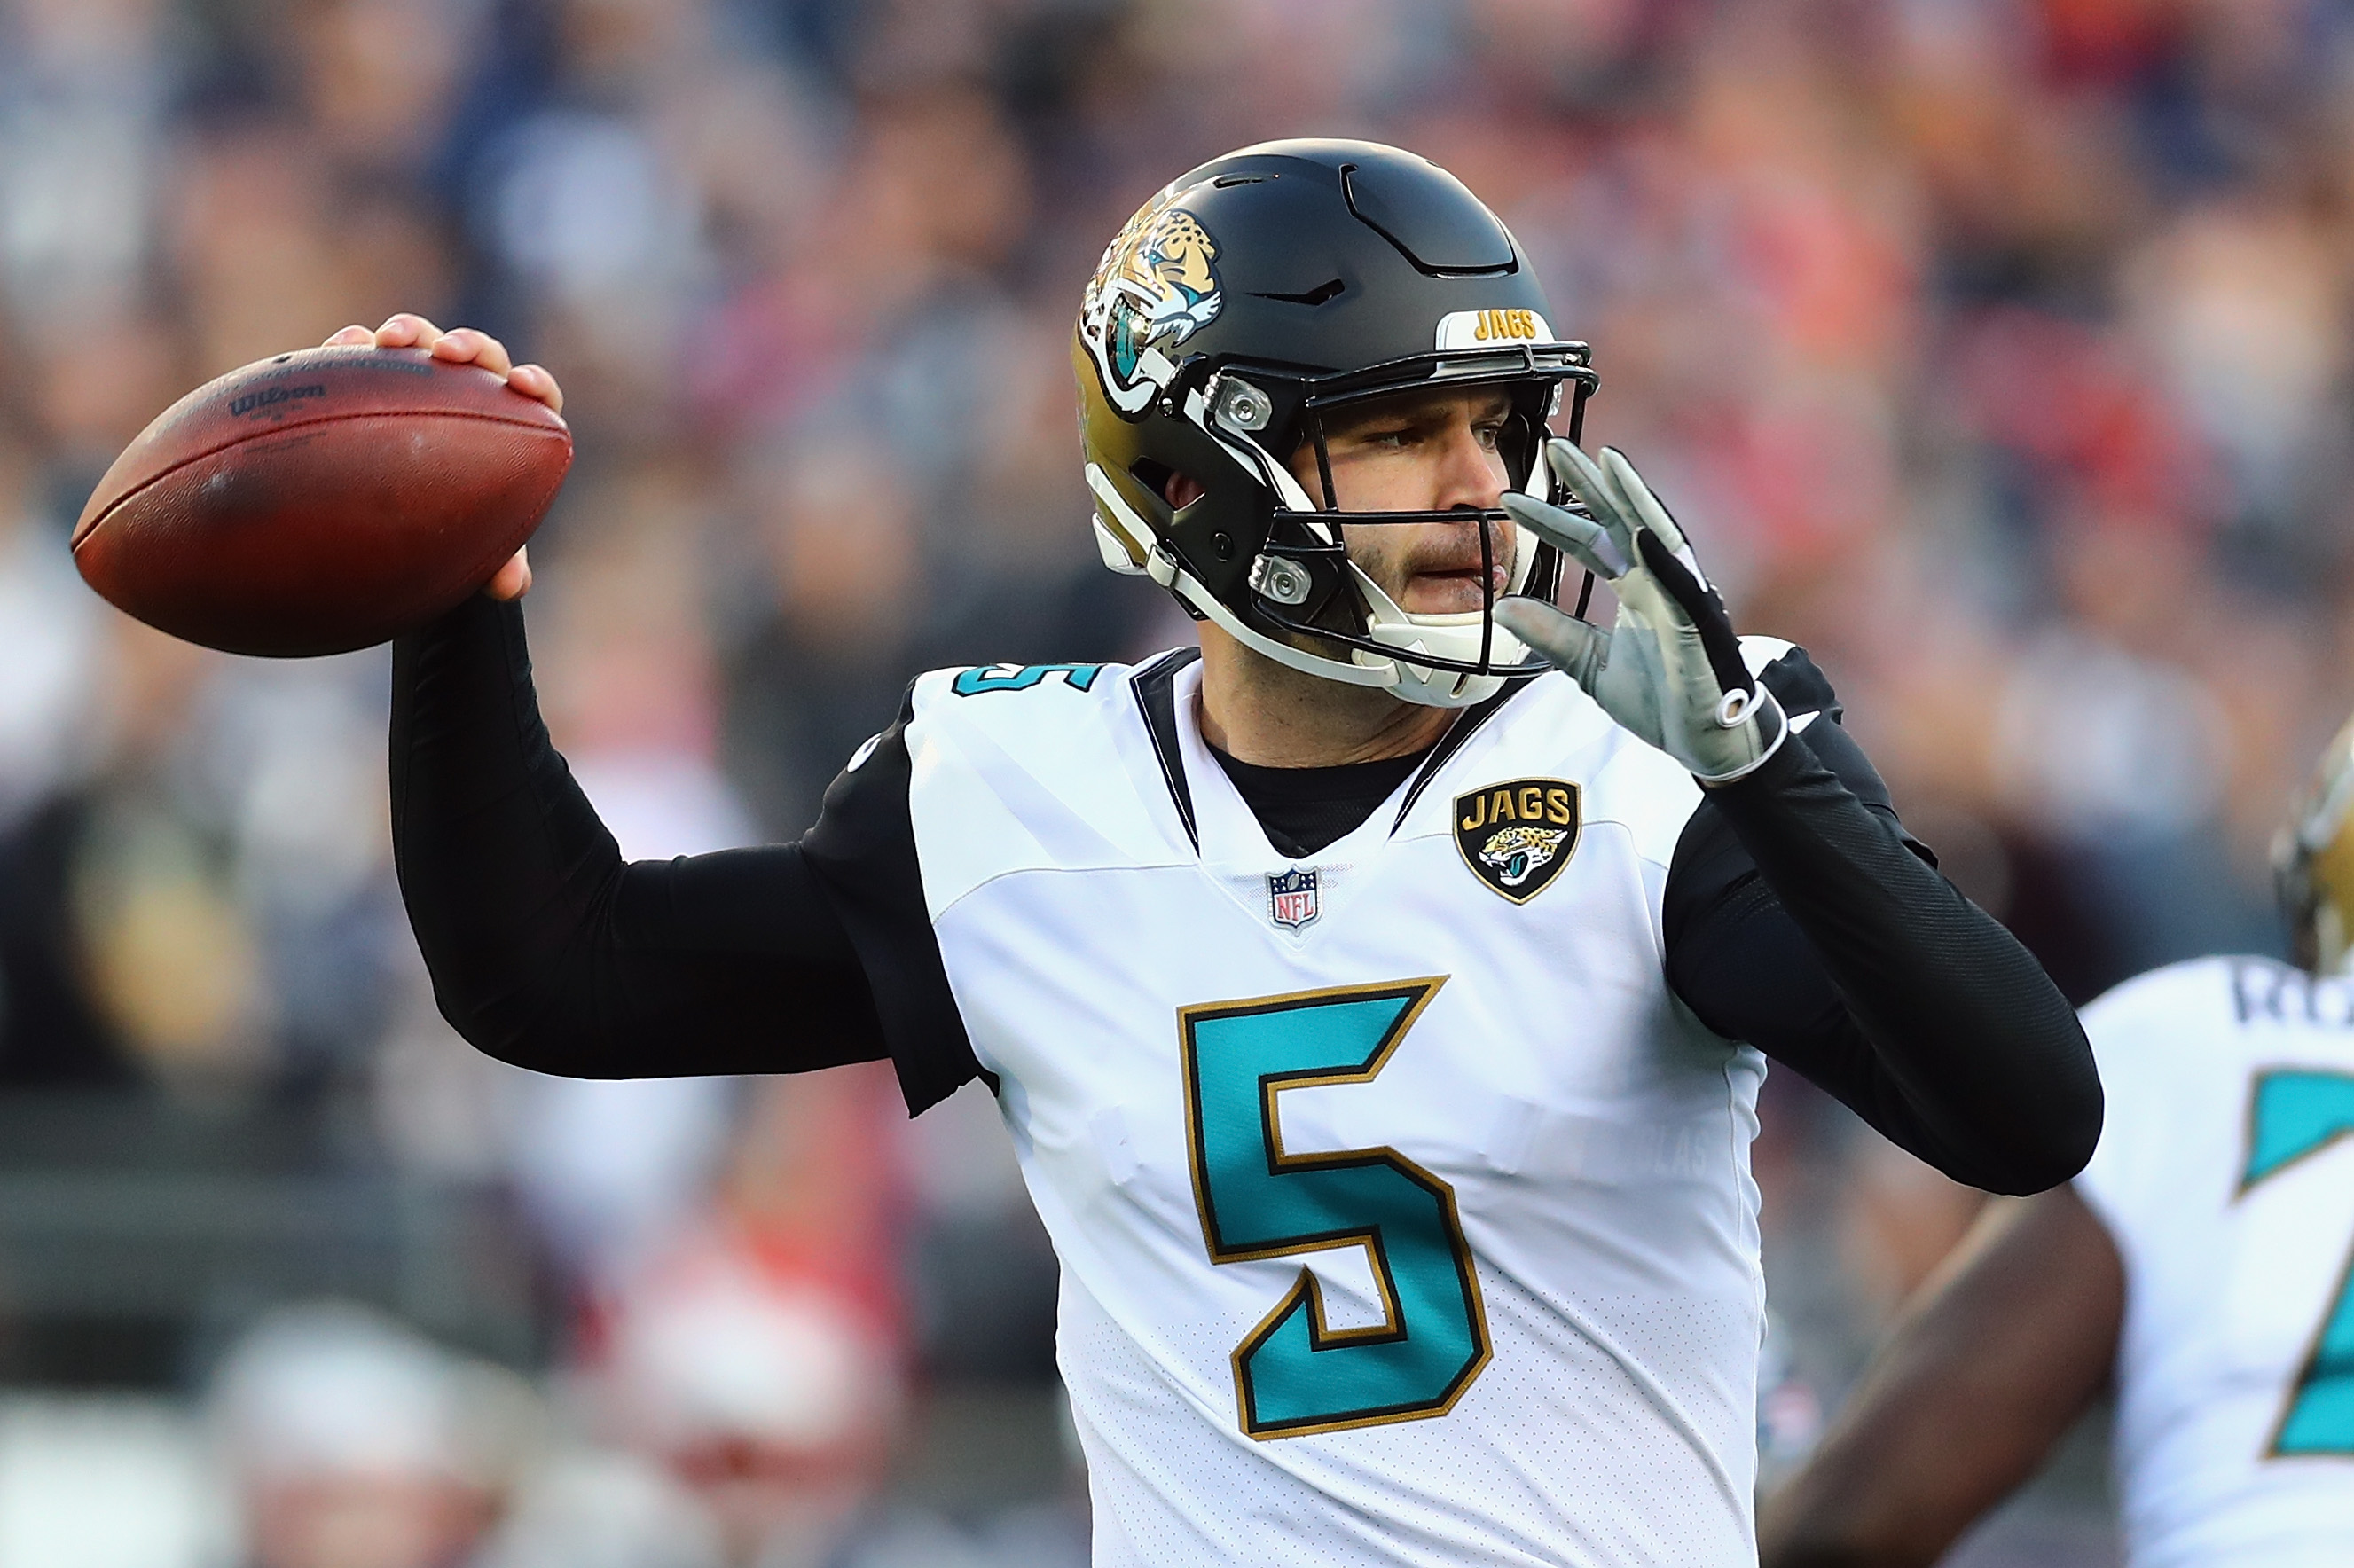 Jacksonville Jaguars: Can Blake Bortles finally exhale and lead?